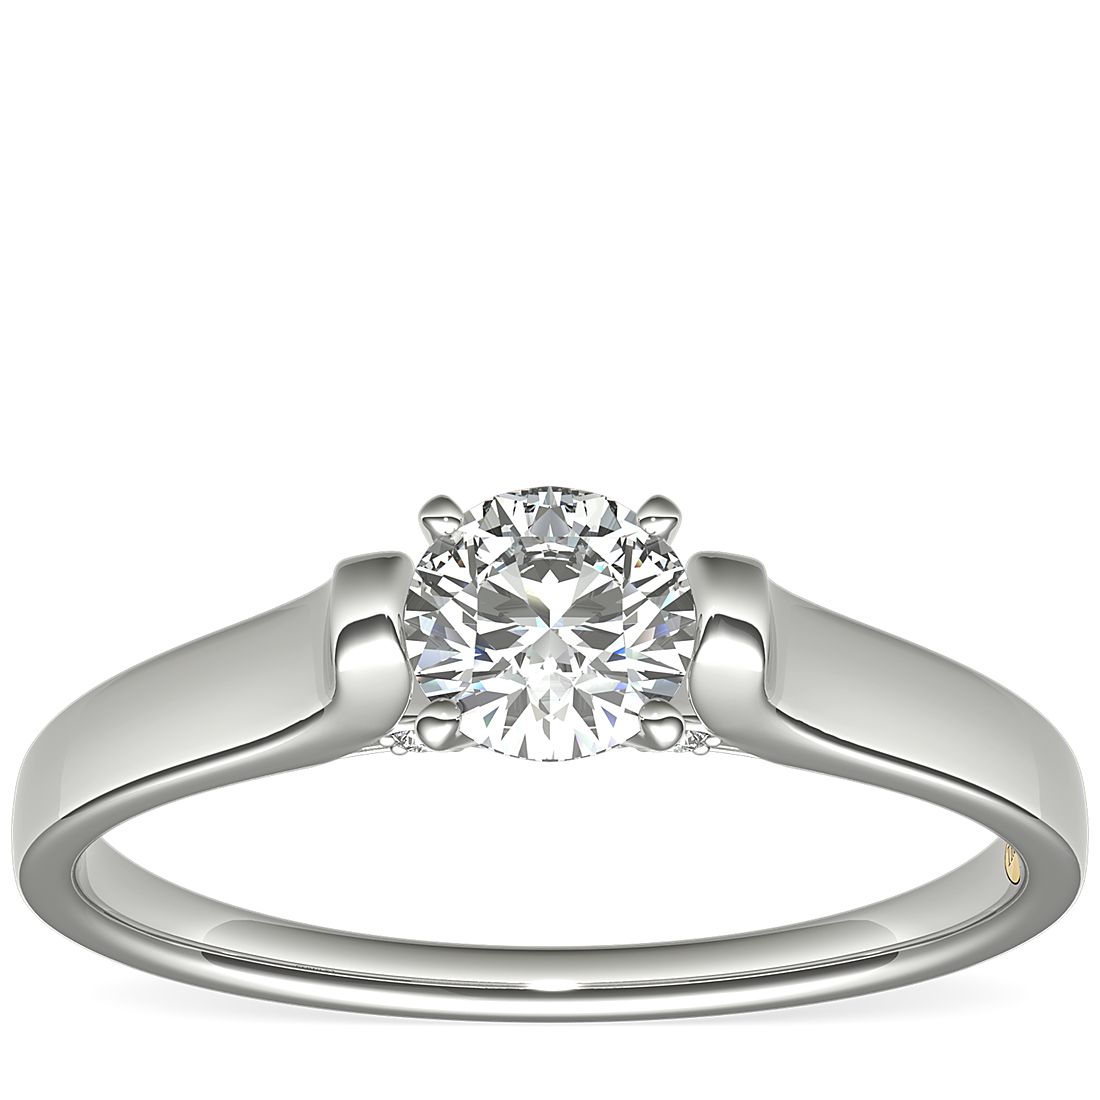 1/2 Carat Ready-to-Ship ZAC ZAC POSEN Cathedral Solitaire Plus Diamond Engagement Ring in Platinum